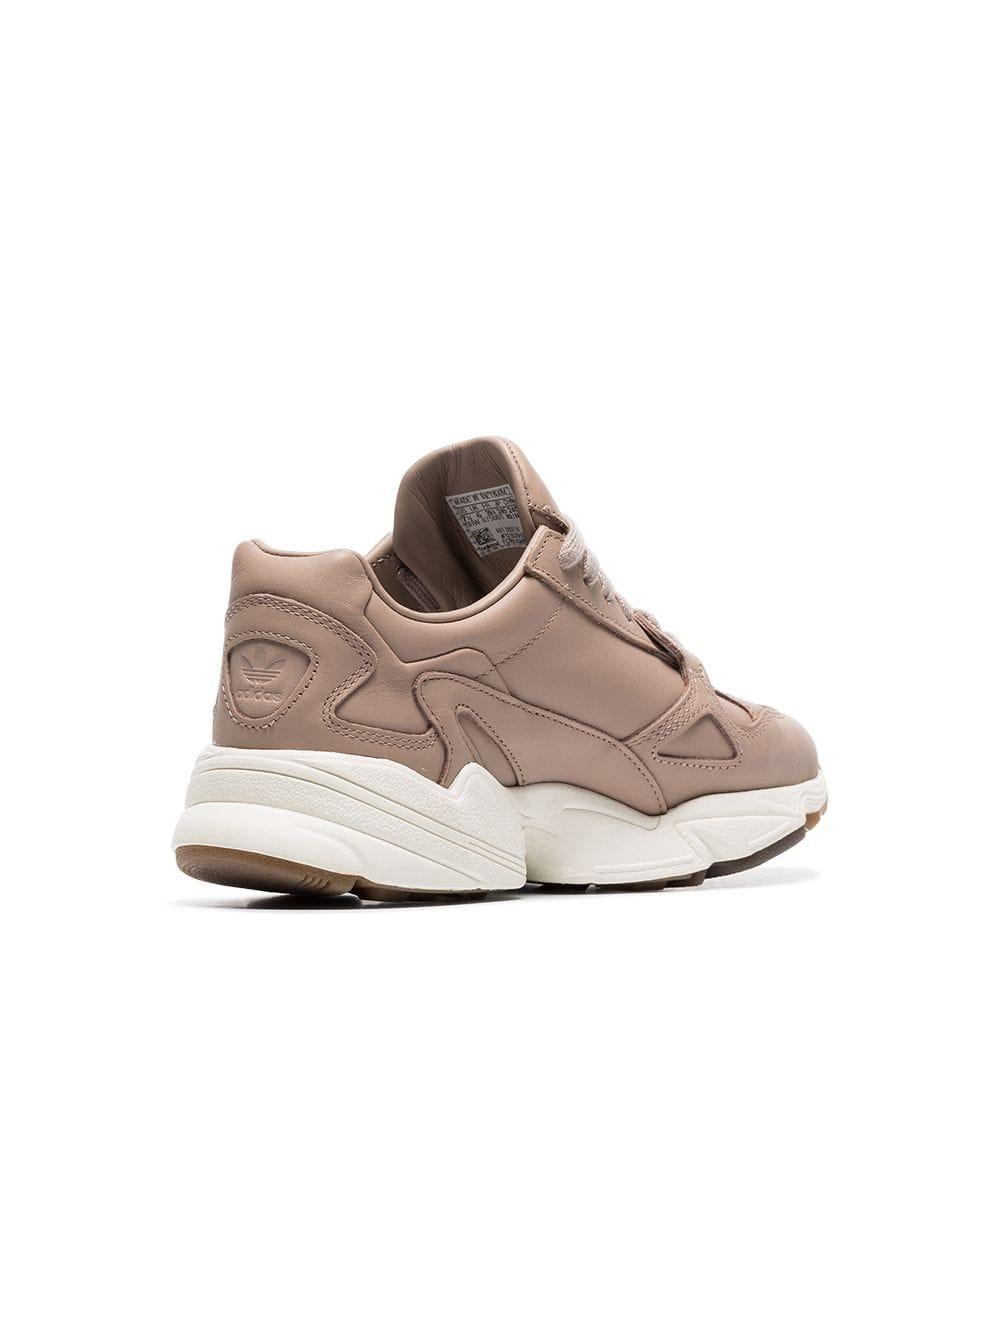 adidas Nude Falcon Low Top Leather Sneakers in Pink - Lyst